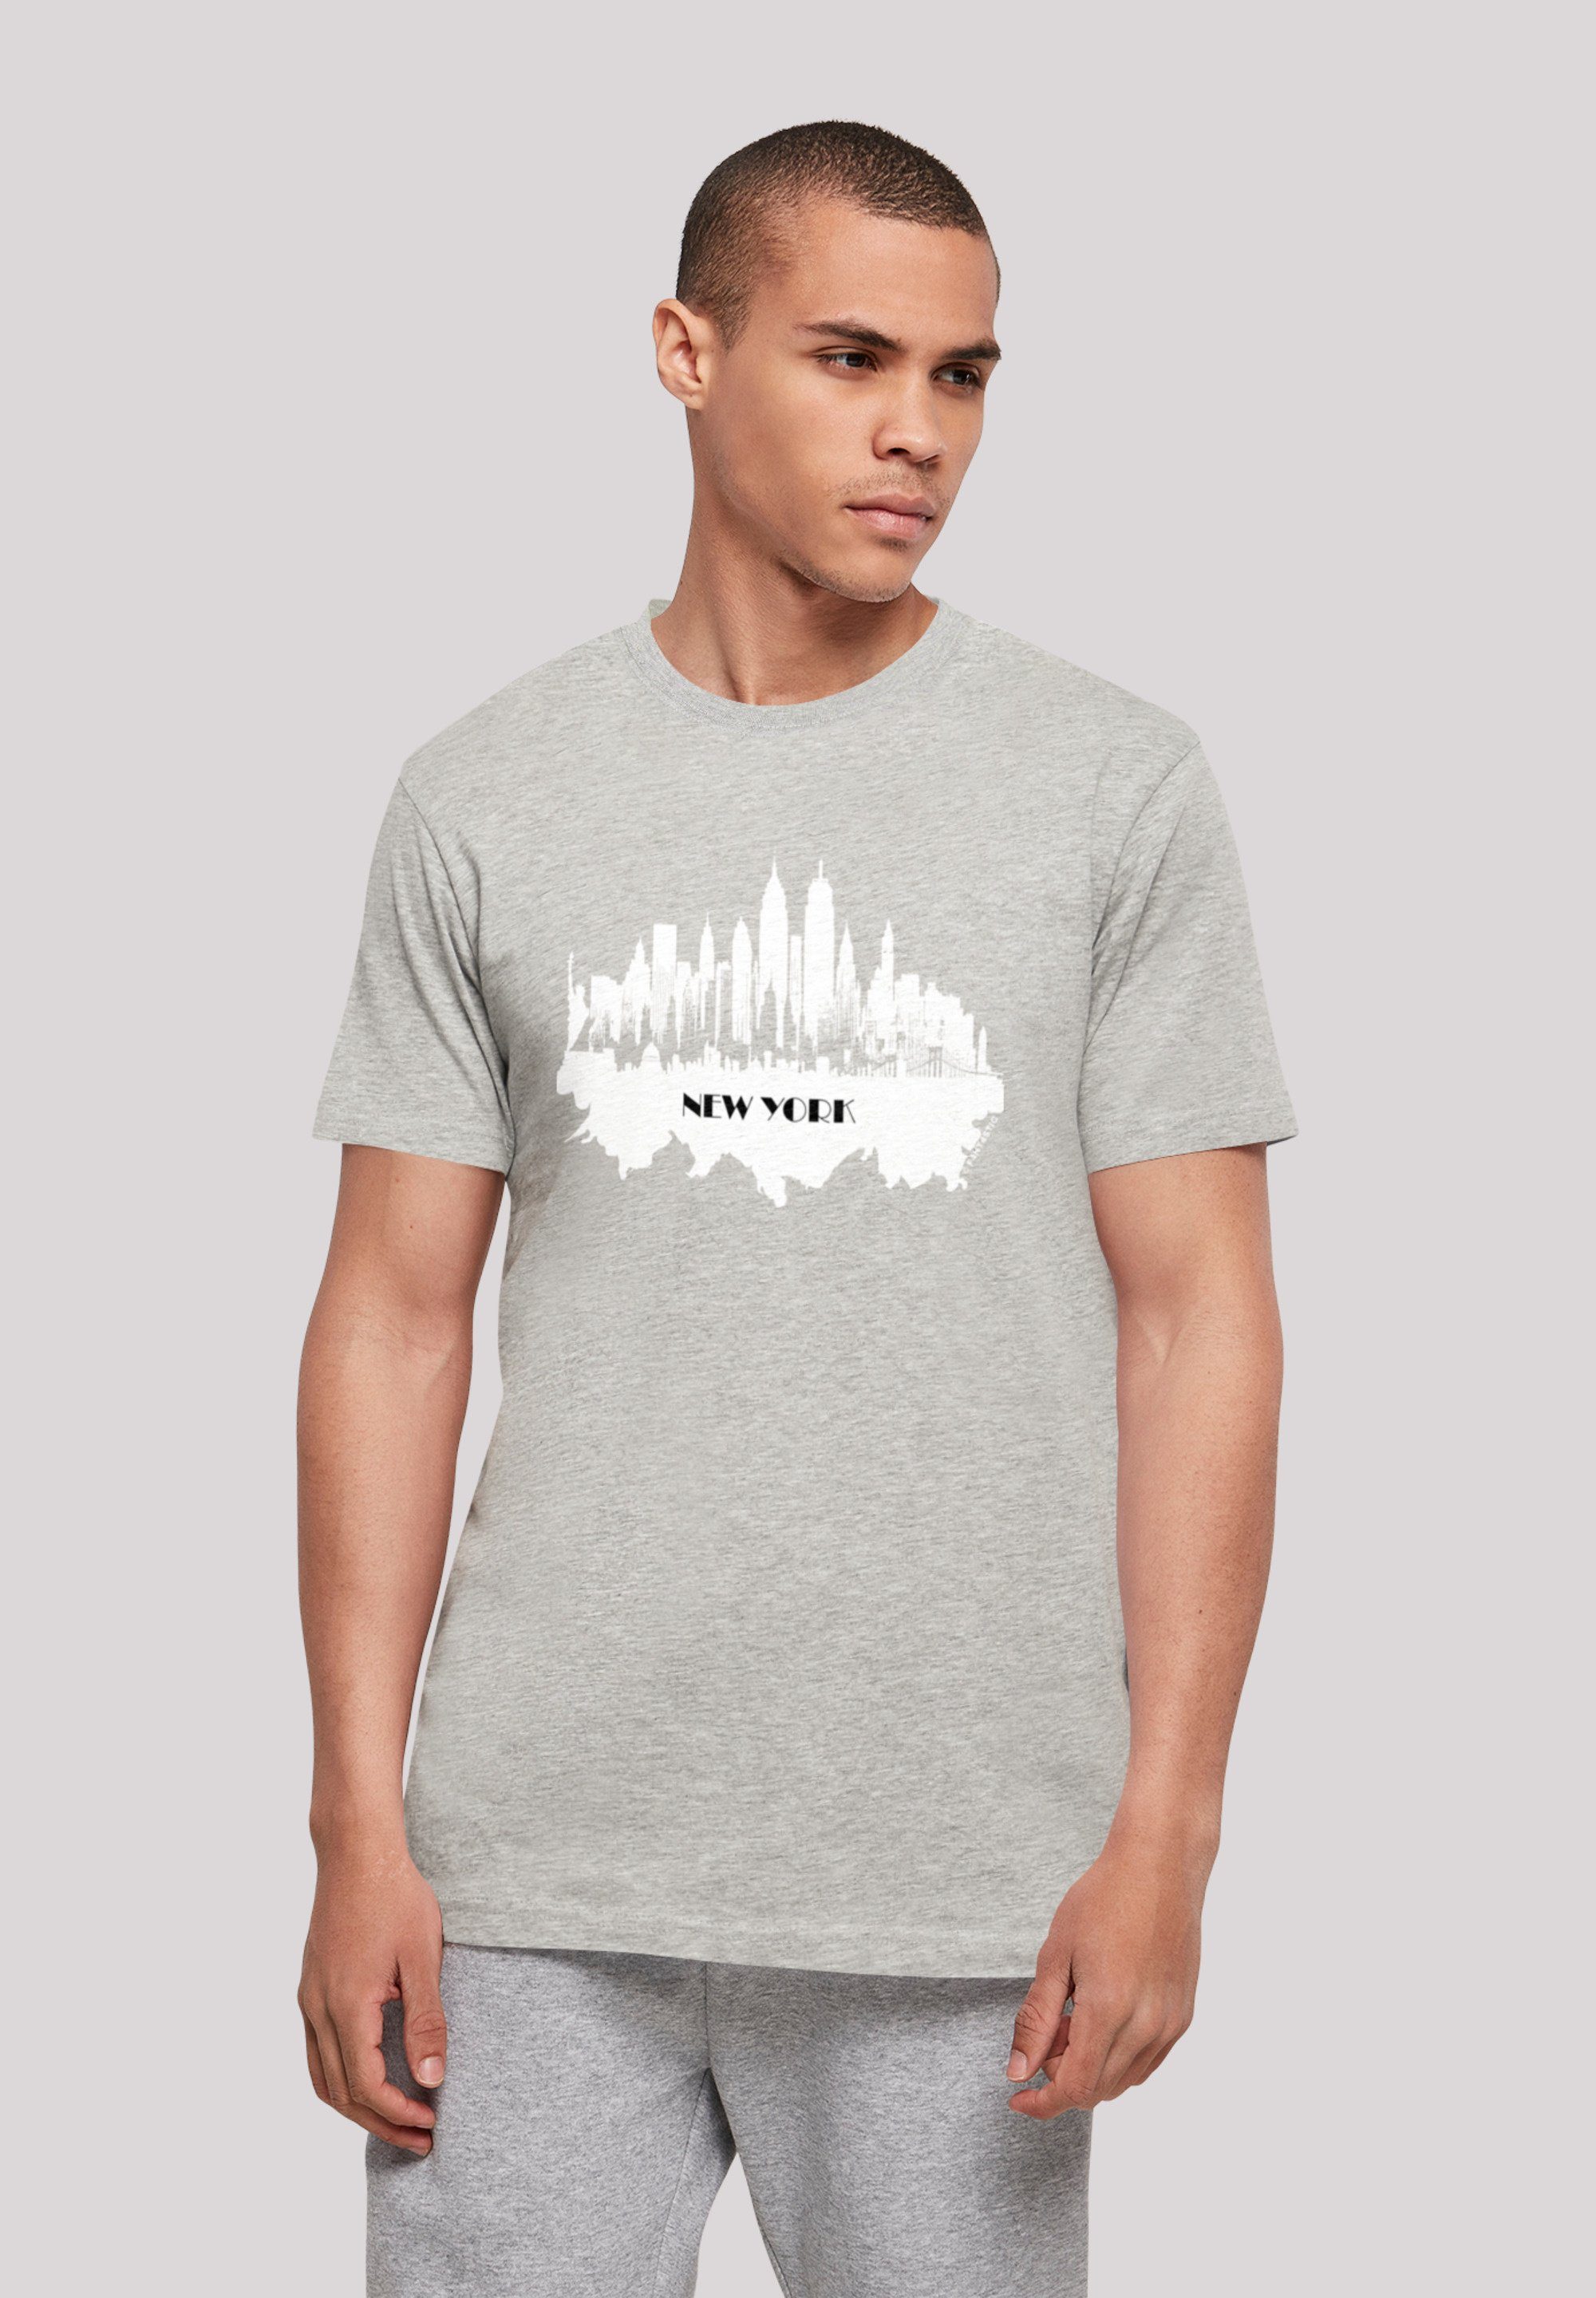 F4NT4STIC heather T-Shirt New - skyline Cities Print York Collection grey